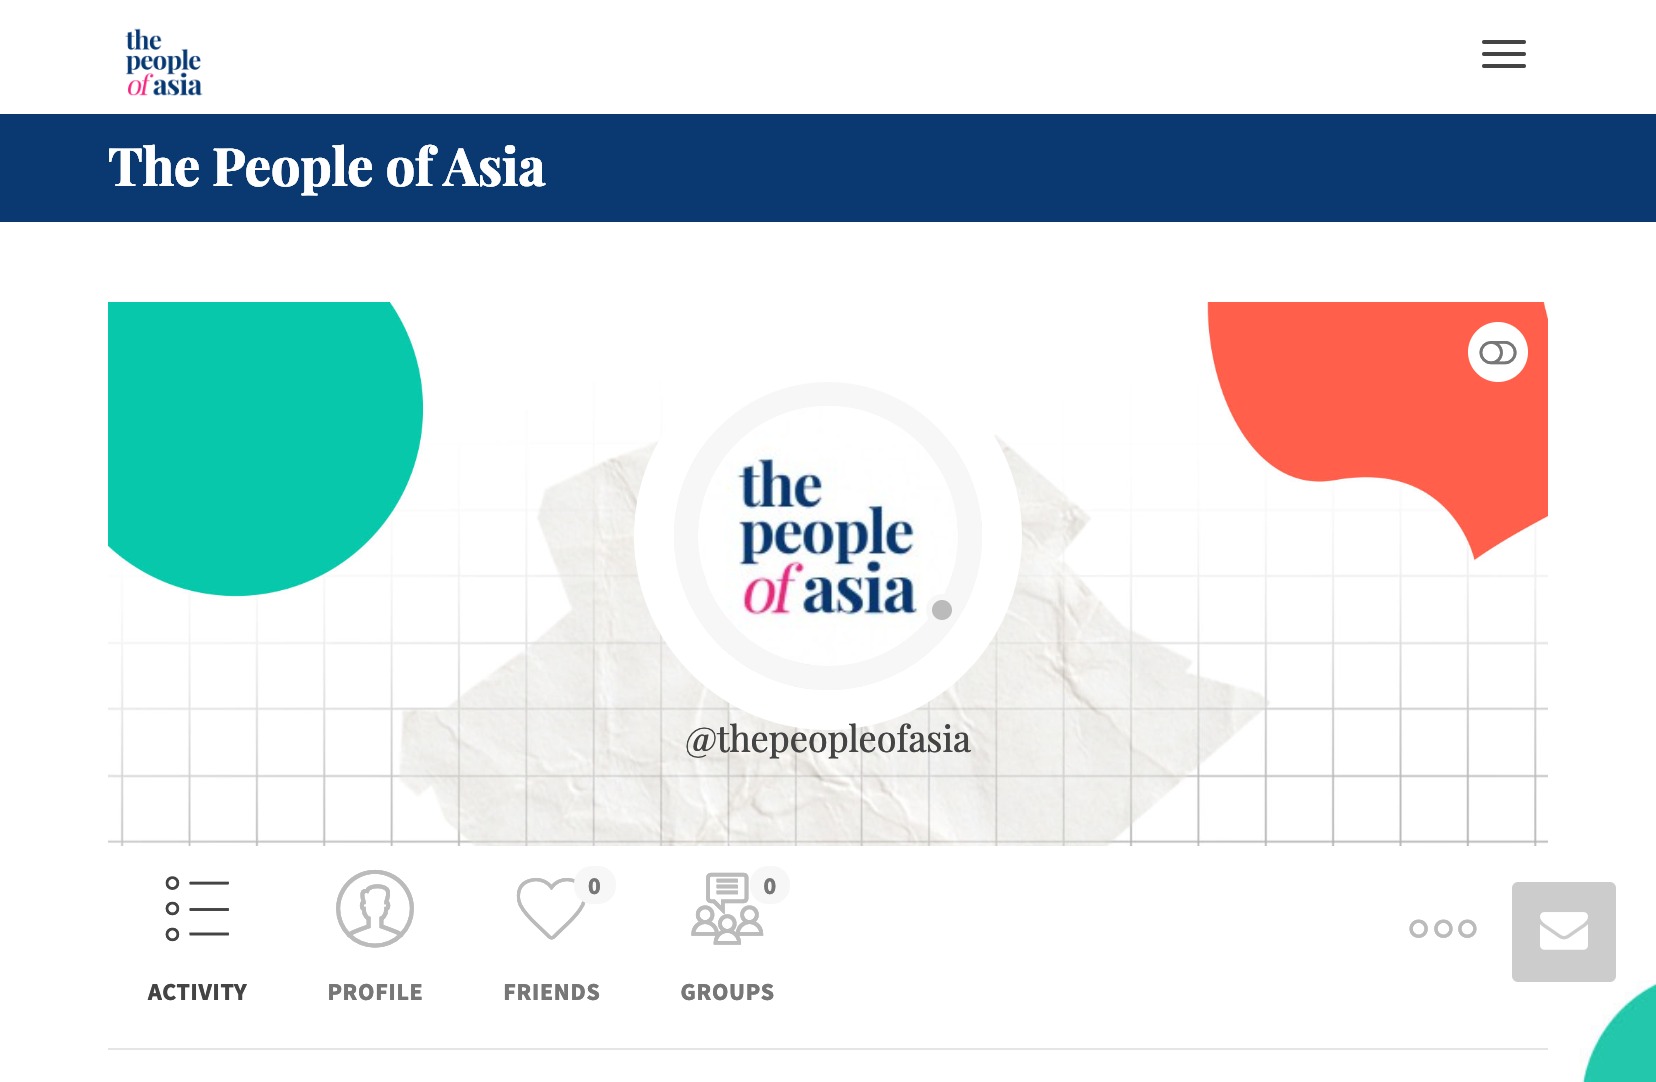 FireShot Capture 504 - The People of Asia – _ - https___thepeopleofasia.com_members_thepeopleofasia_